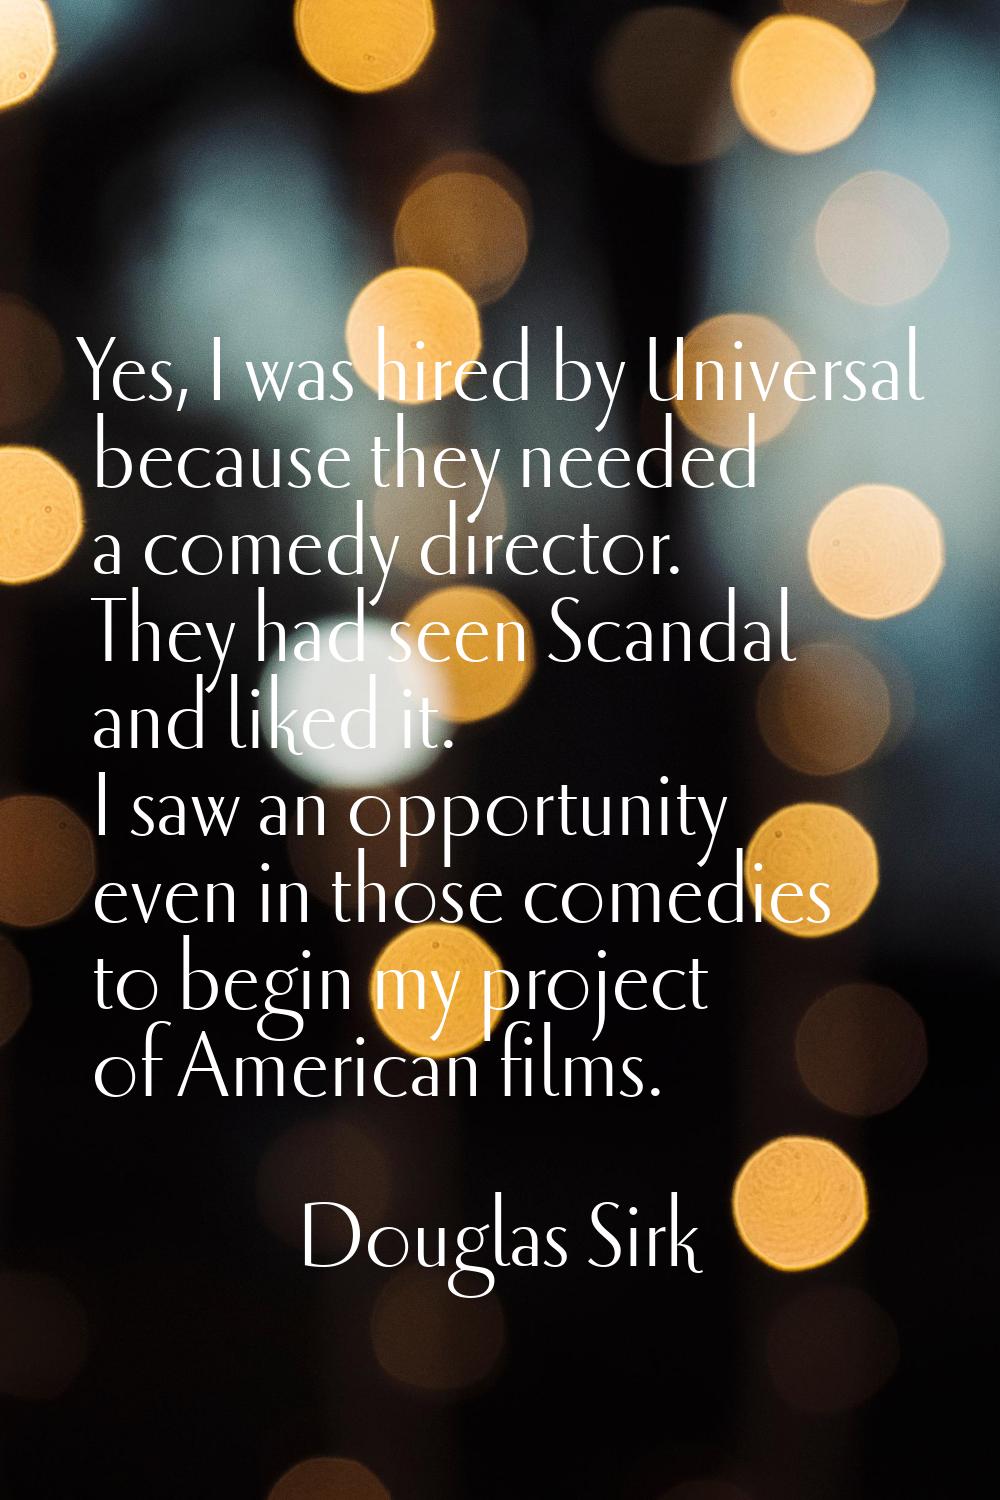 Yes, I was hired by Universal because they needed a comedy director. They had seen Scandal and like